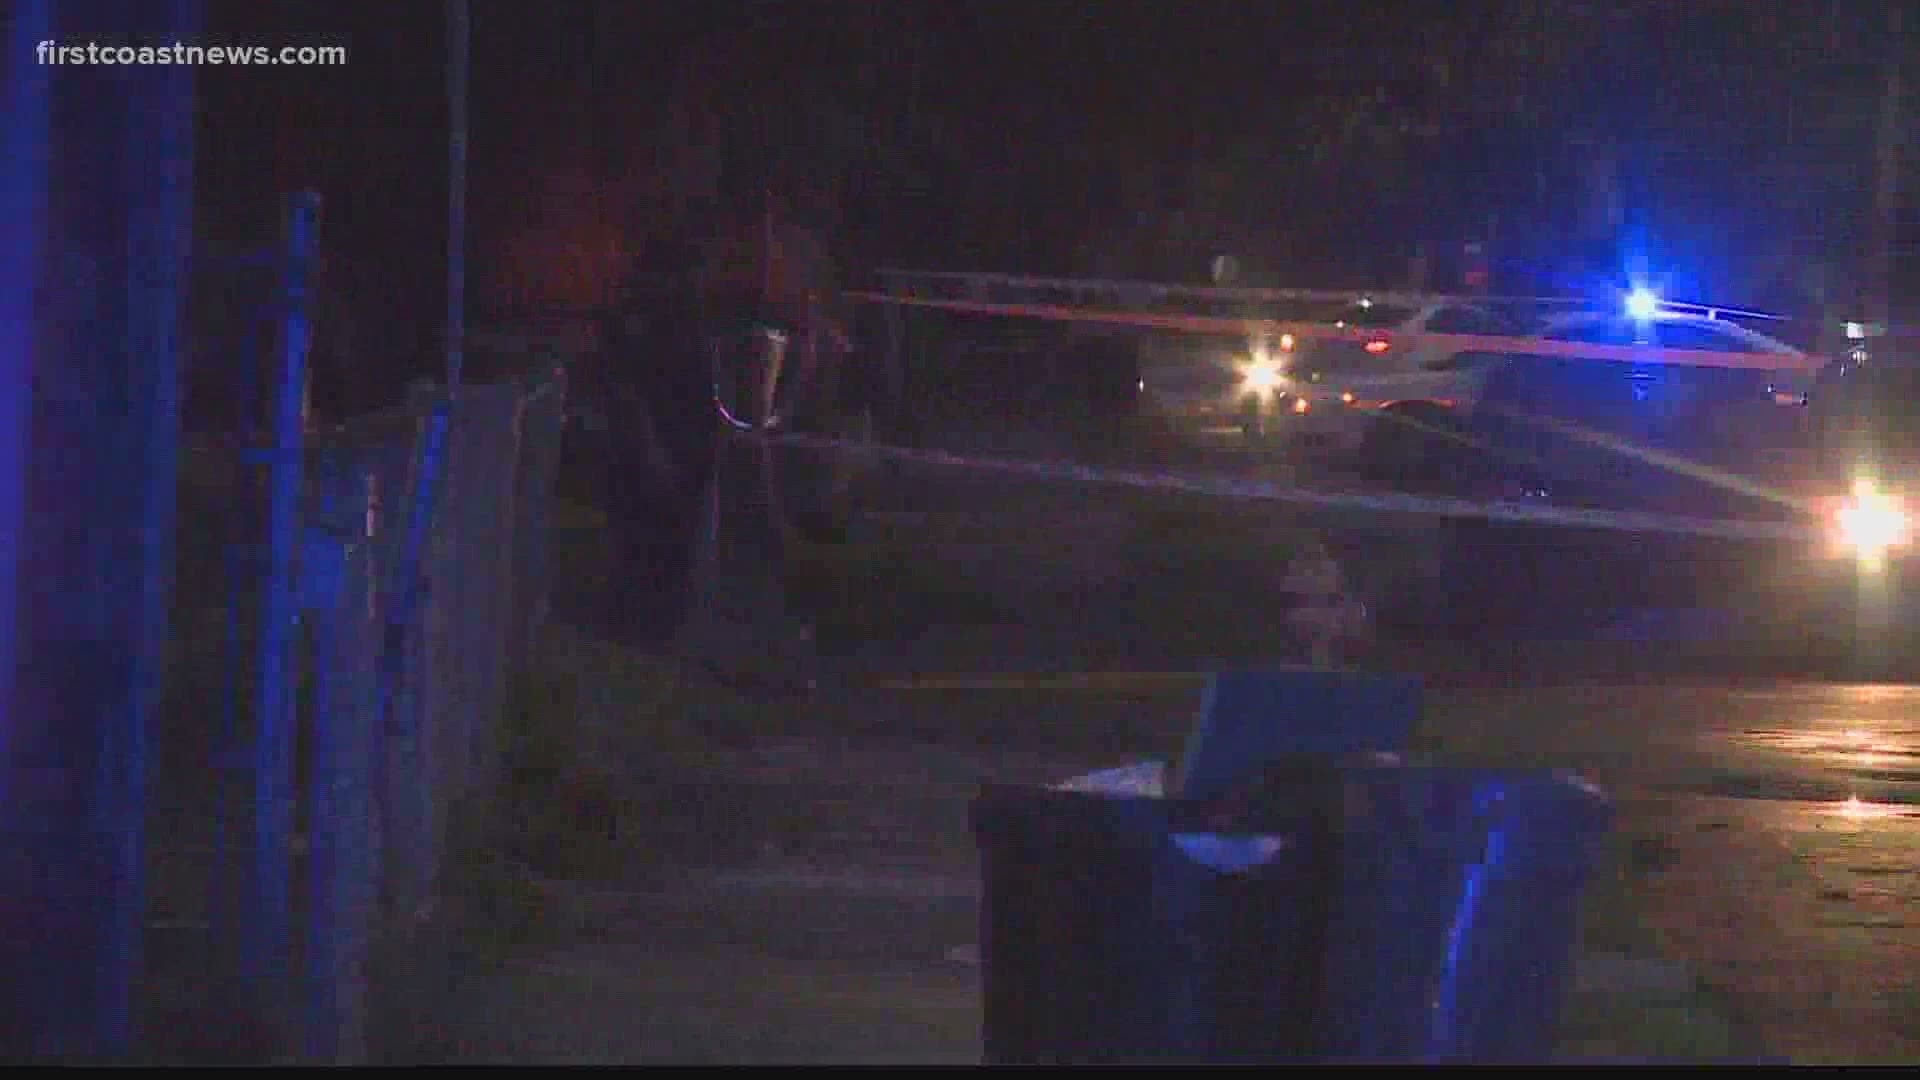 The shooting happened in the 500 block of West 23rd Street, about a block west of Brentwood Park, according to the JSO.